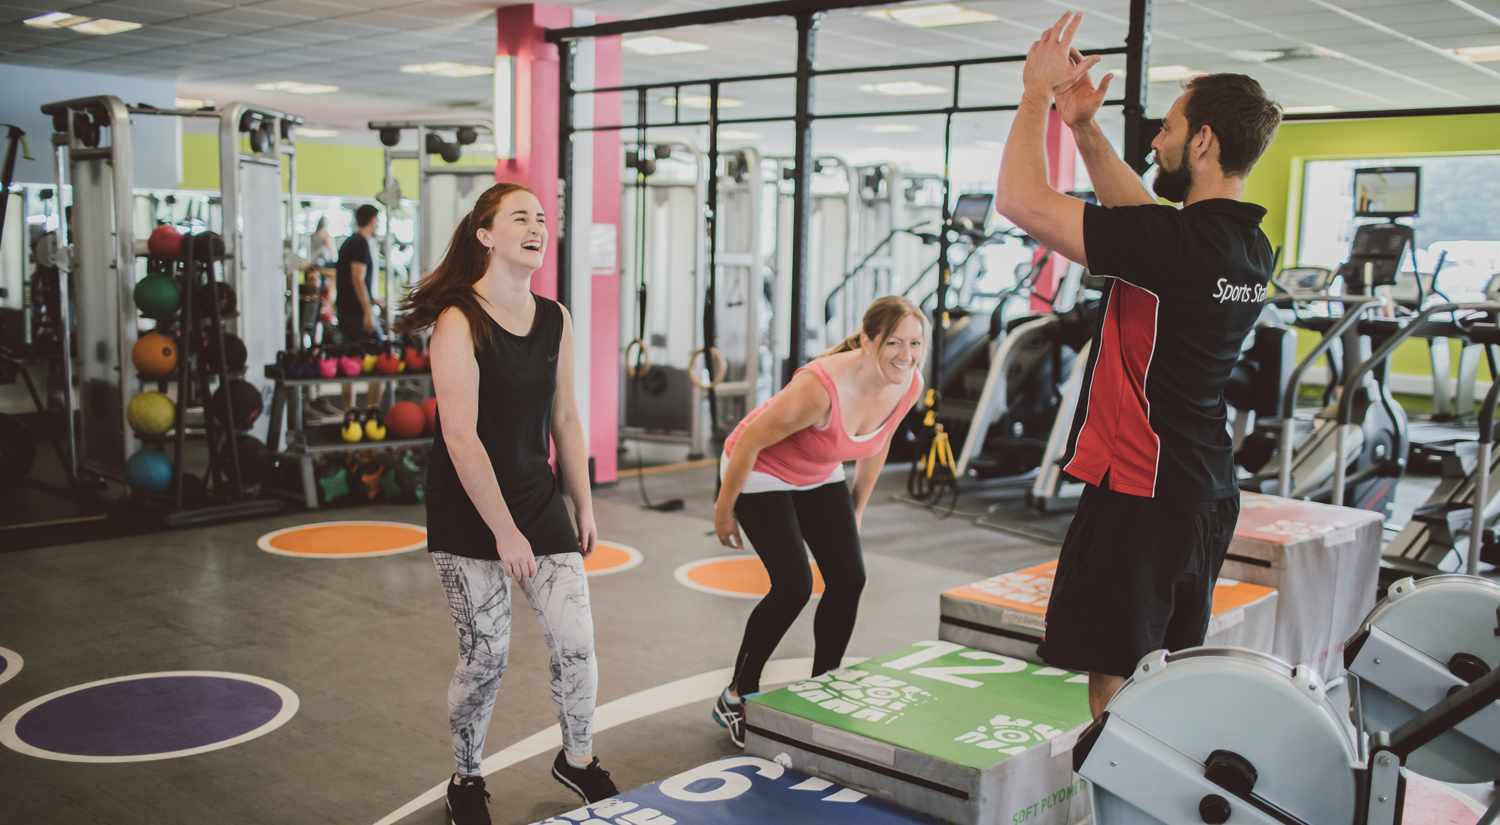 Personal trainer training two people in a gym